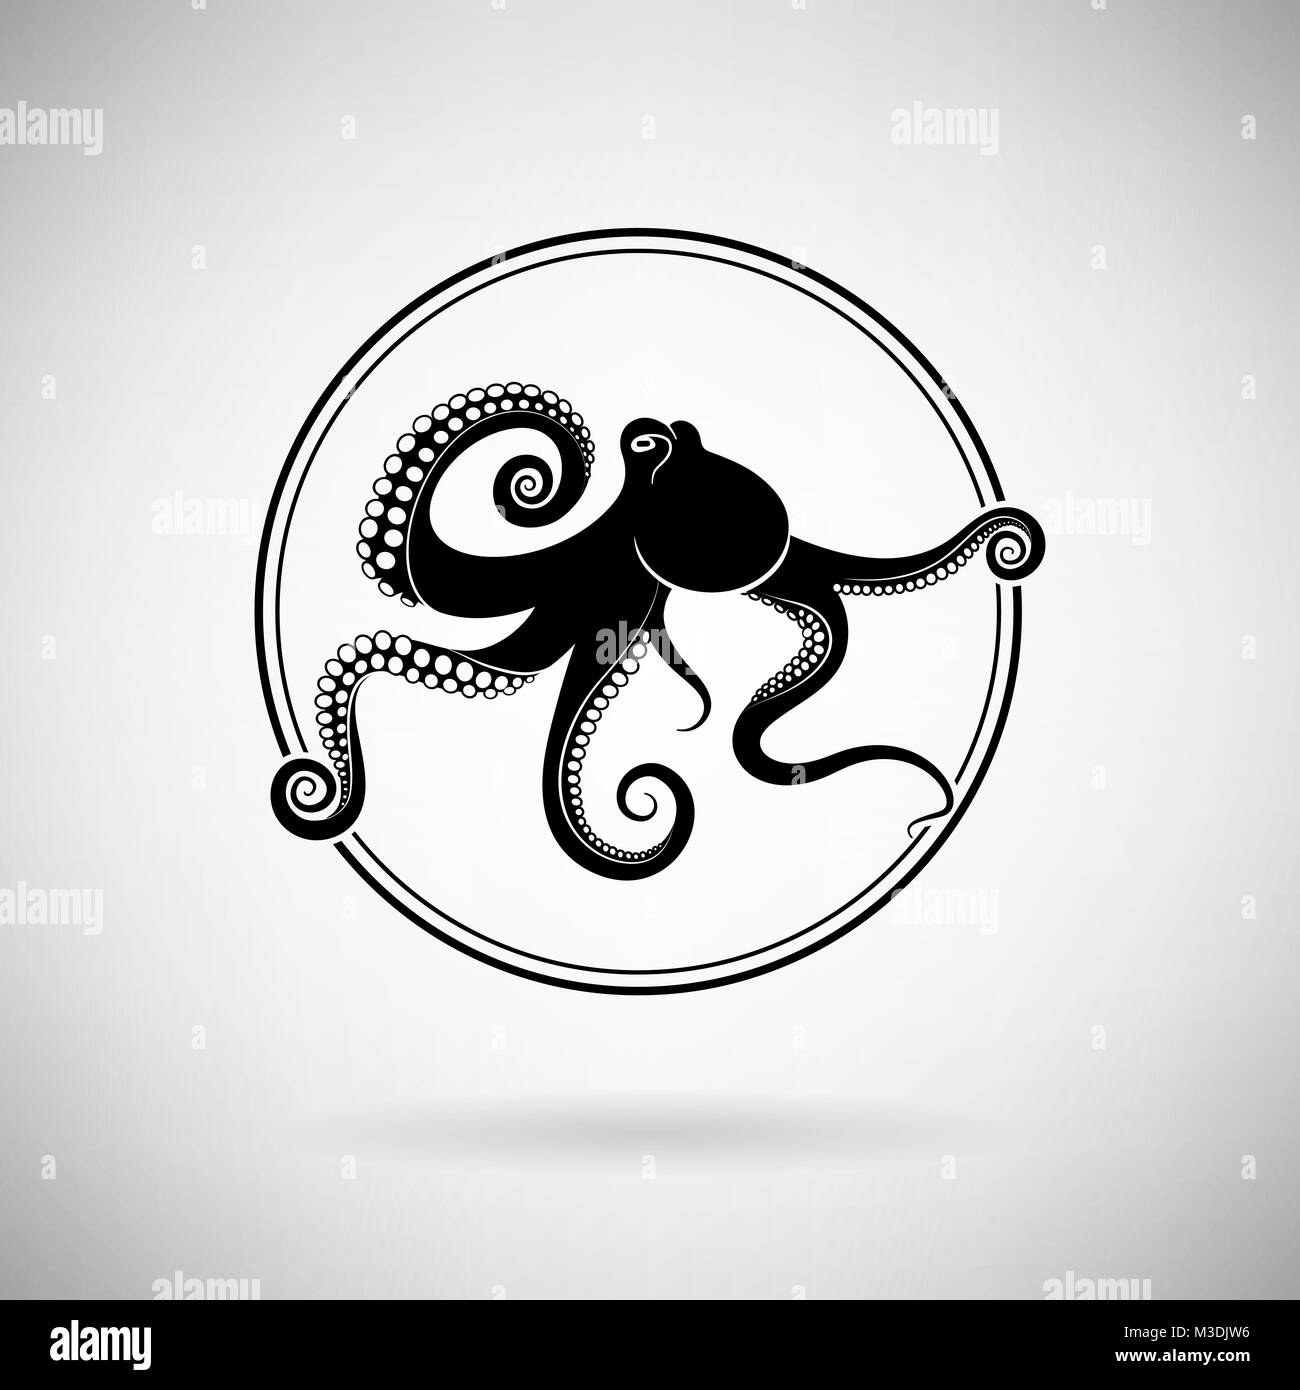 octopus icon on a light background Stock Vector